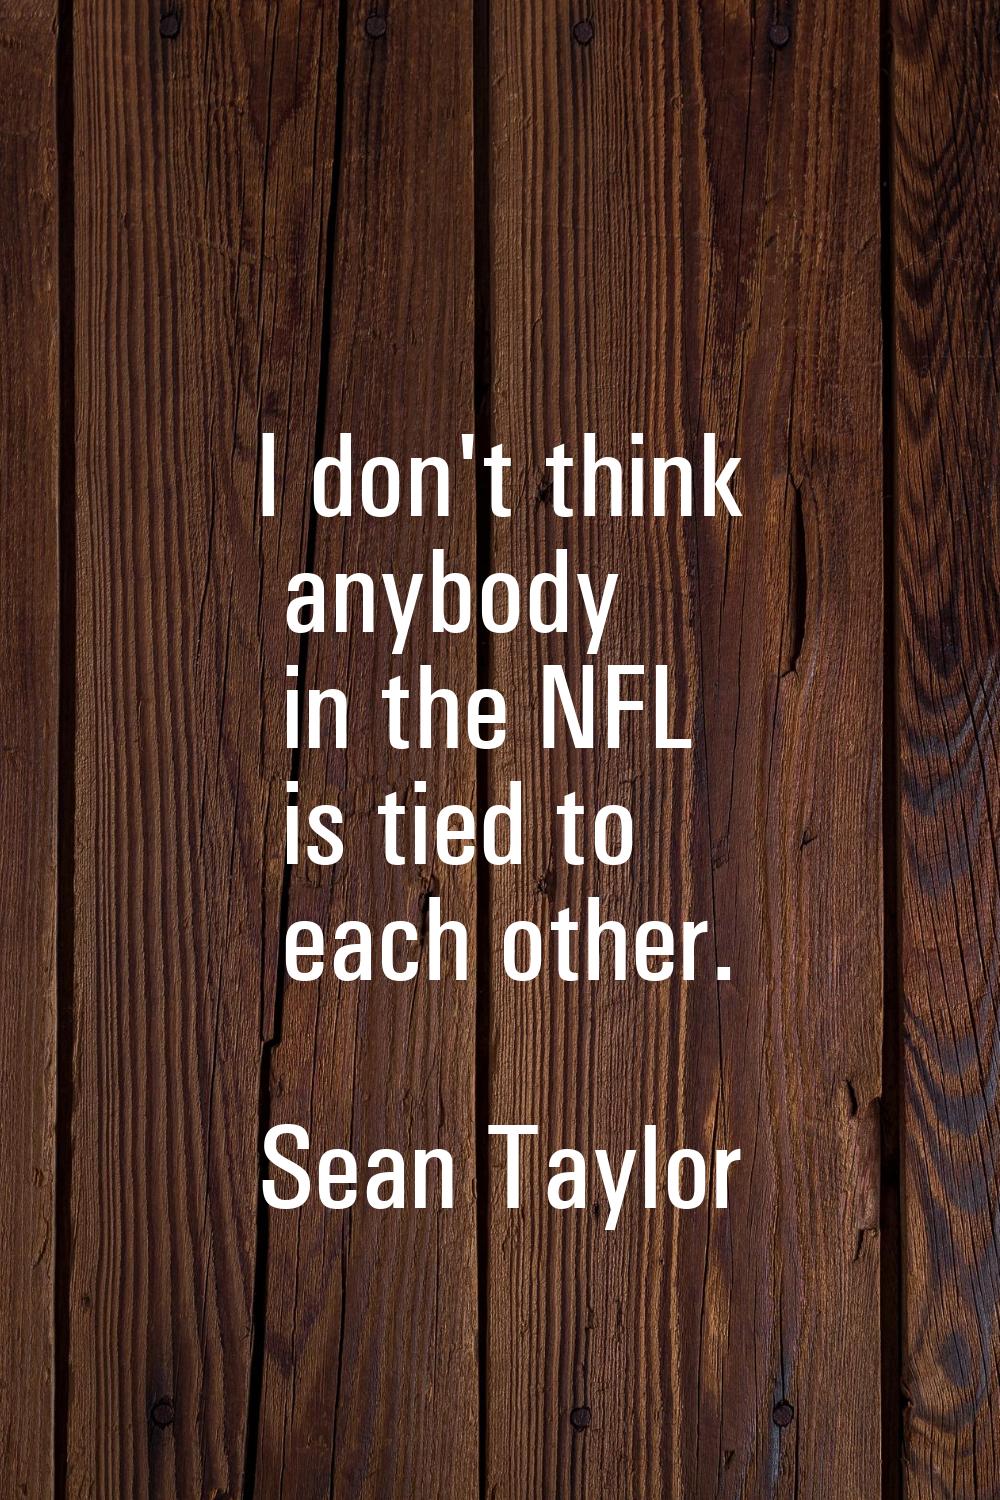 I don't think anybody in the NFL is tied to each other.